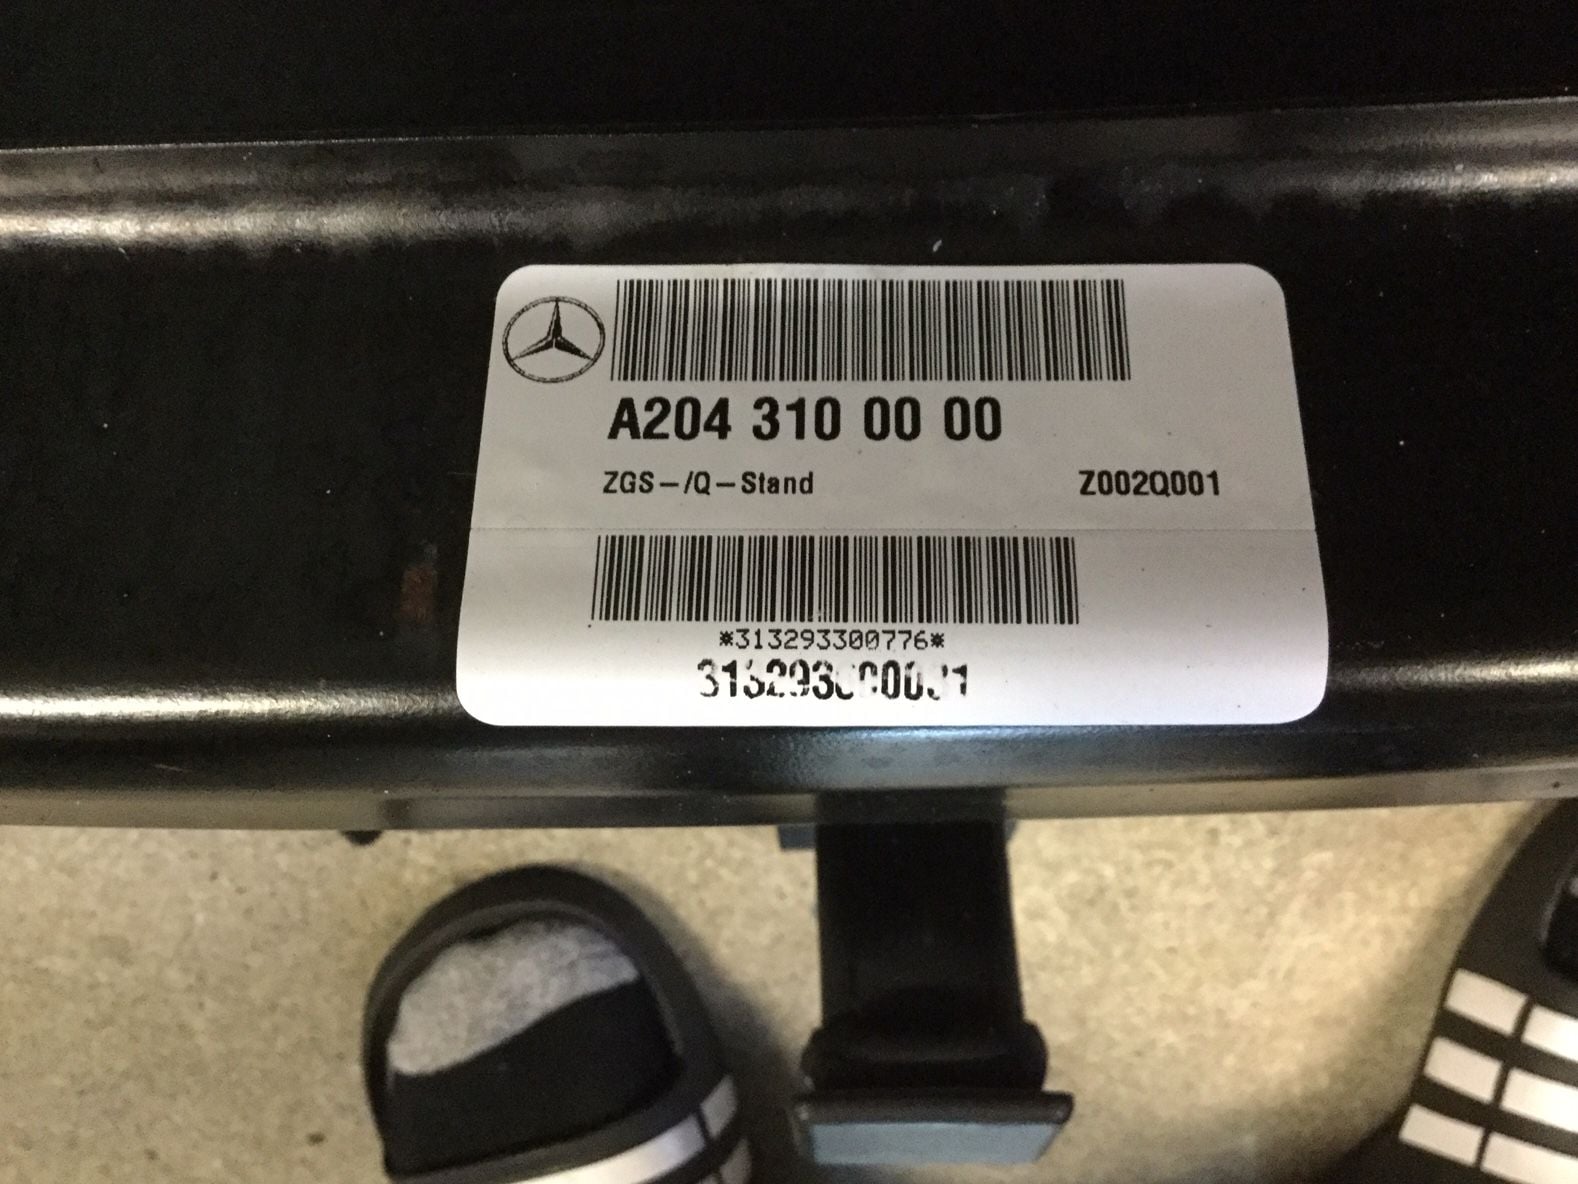 Accessories - FS: Factory OEM GLK Hitch Perfect Condition Fits All GLK Models - Used - 2008 to 2015 Mercedes-Benz GLK350 - Danbury, CT 06810, United States